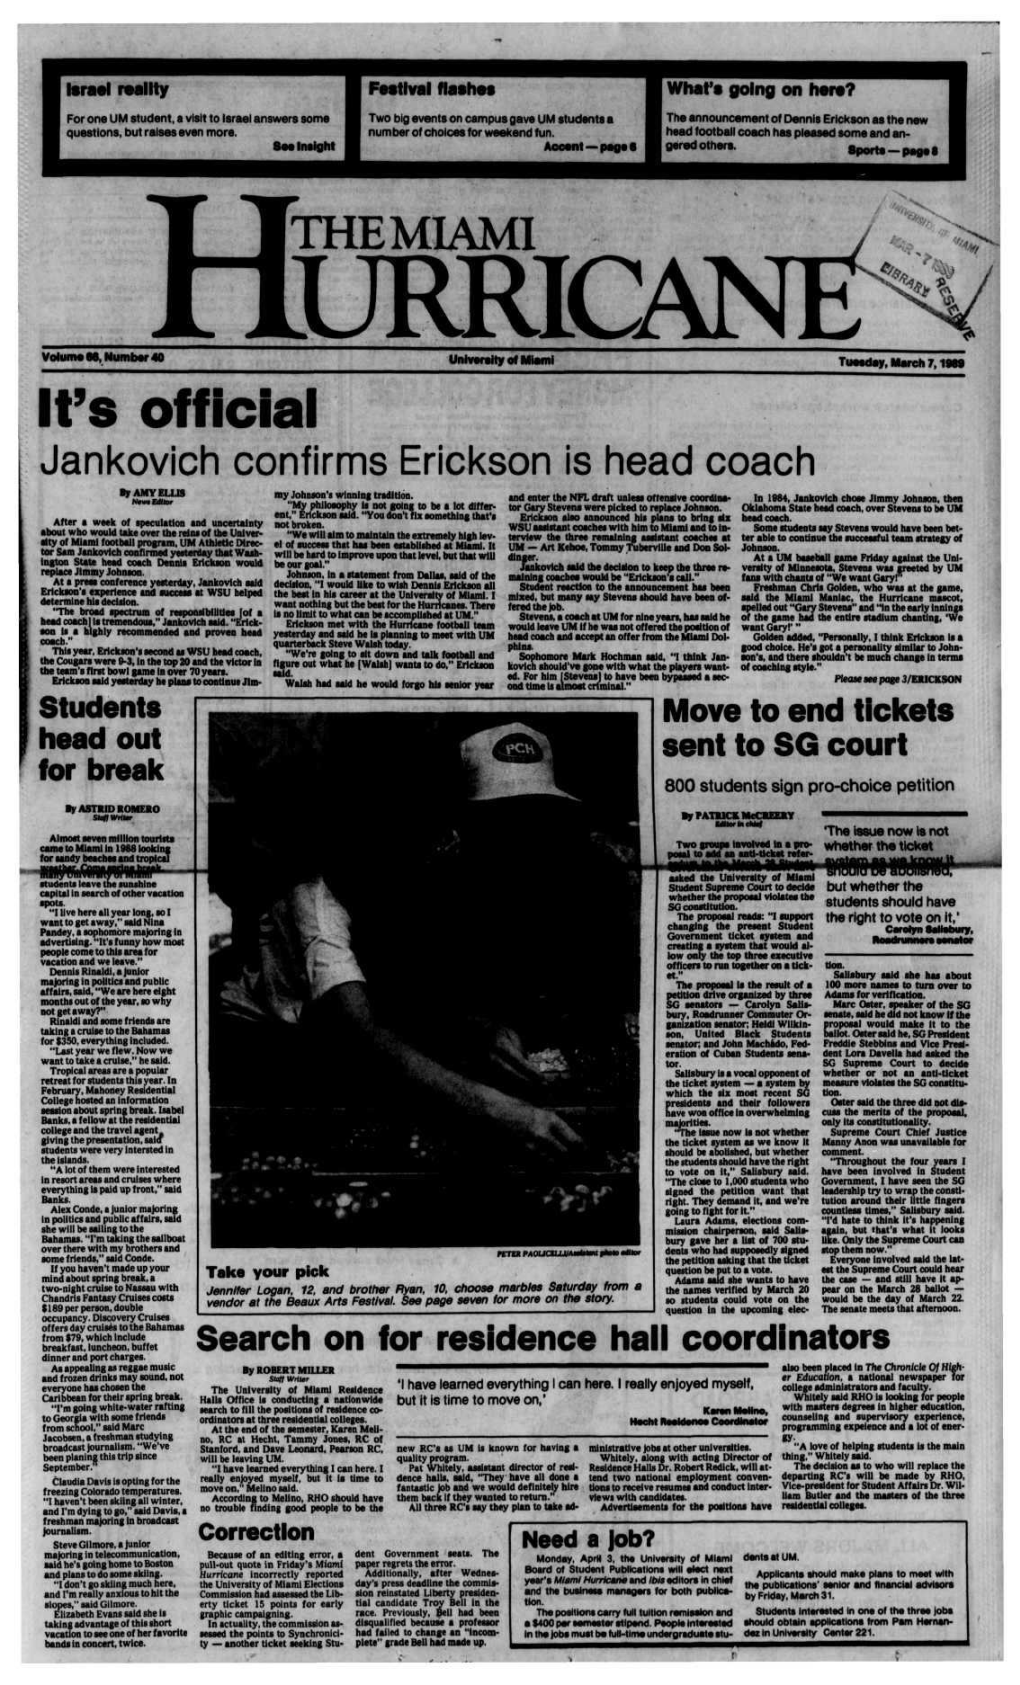 It's Official Jankovich Confirms Erickson Is Head Coach by AMY ELLIS My Johnson's Winning Tradition